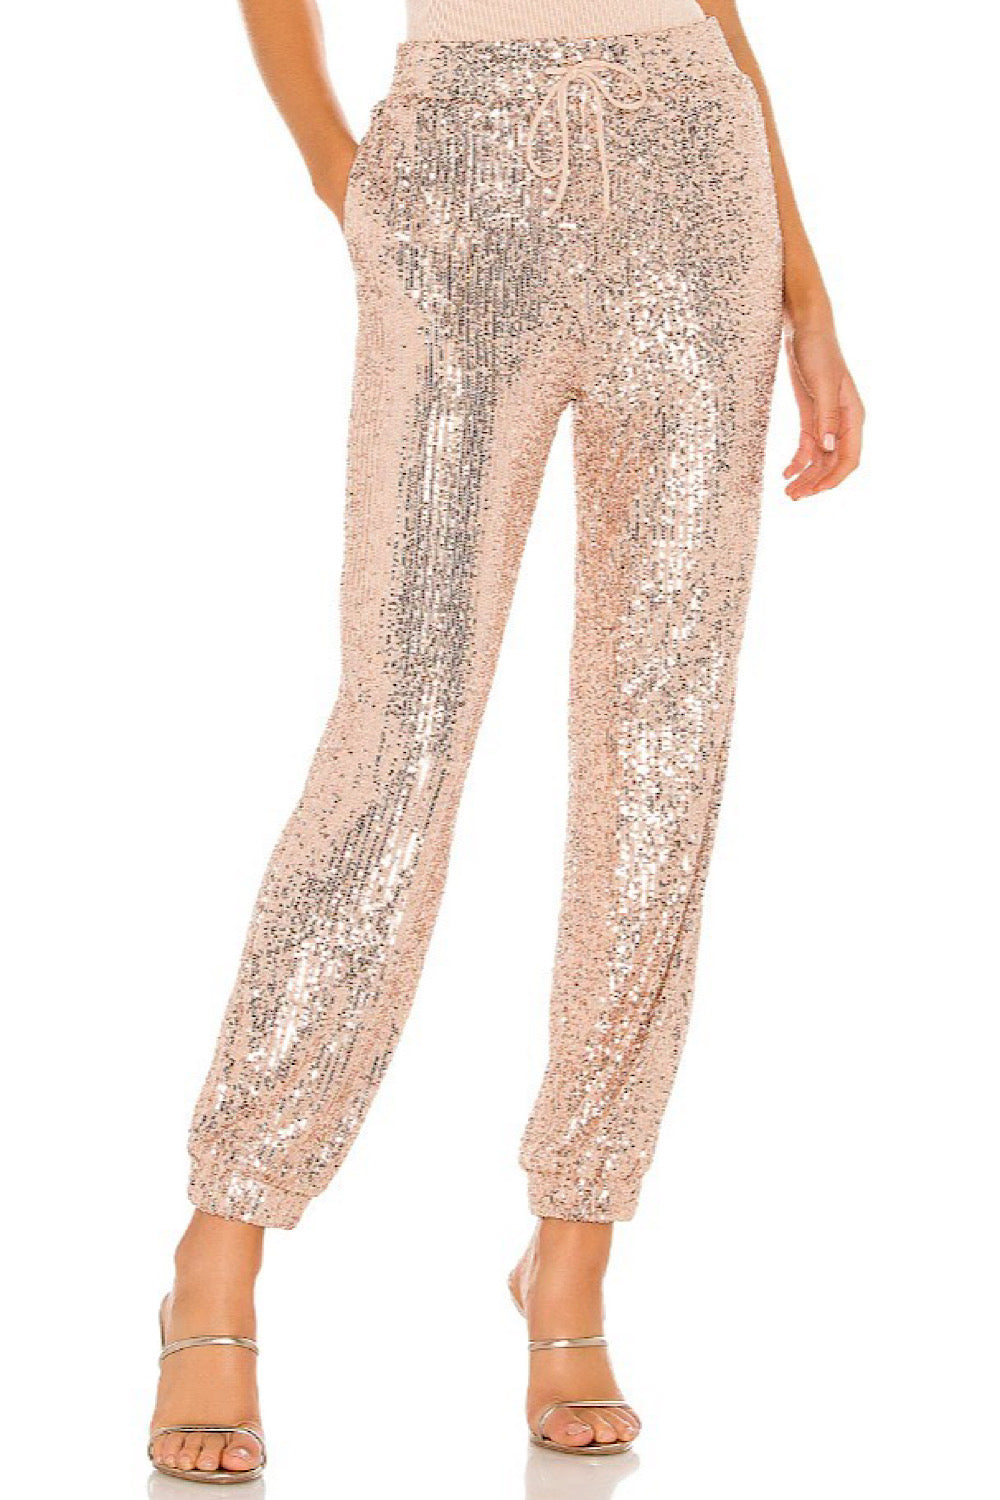 ROSE GOLD SEQUIN JOGGER